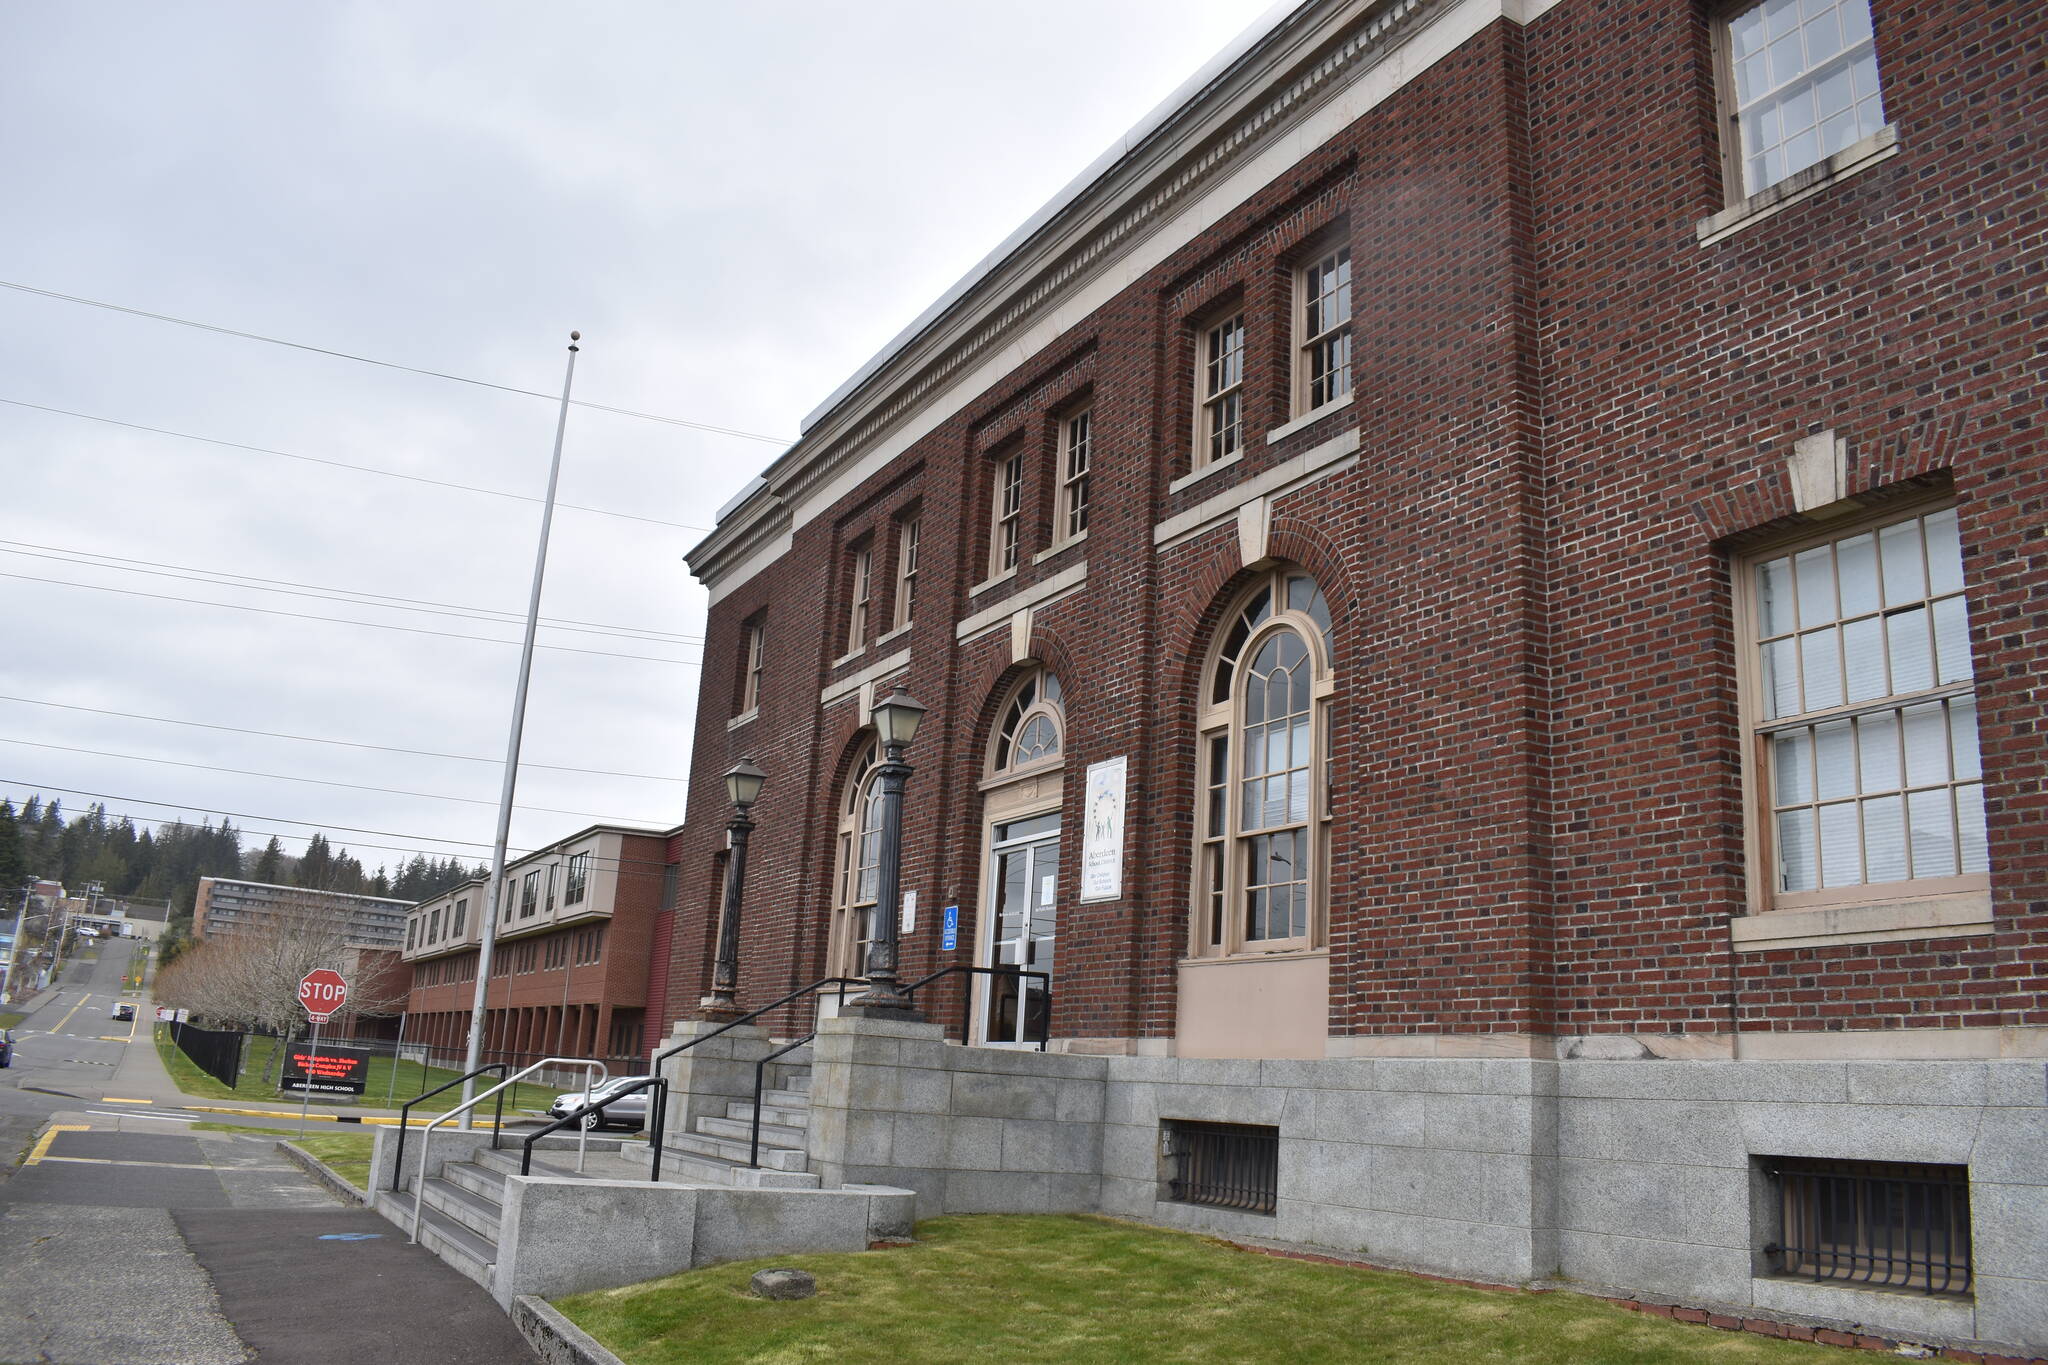 Clayton Franke / The Daily World
Aberdeen School District officials are working on a plan to cut spending by $3.5 million for next school year. The plan should be ready by the end of April. The district is currently on spring break.